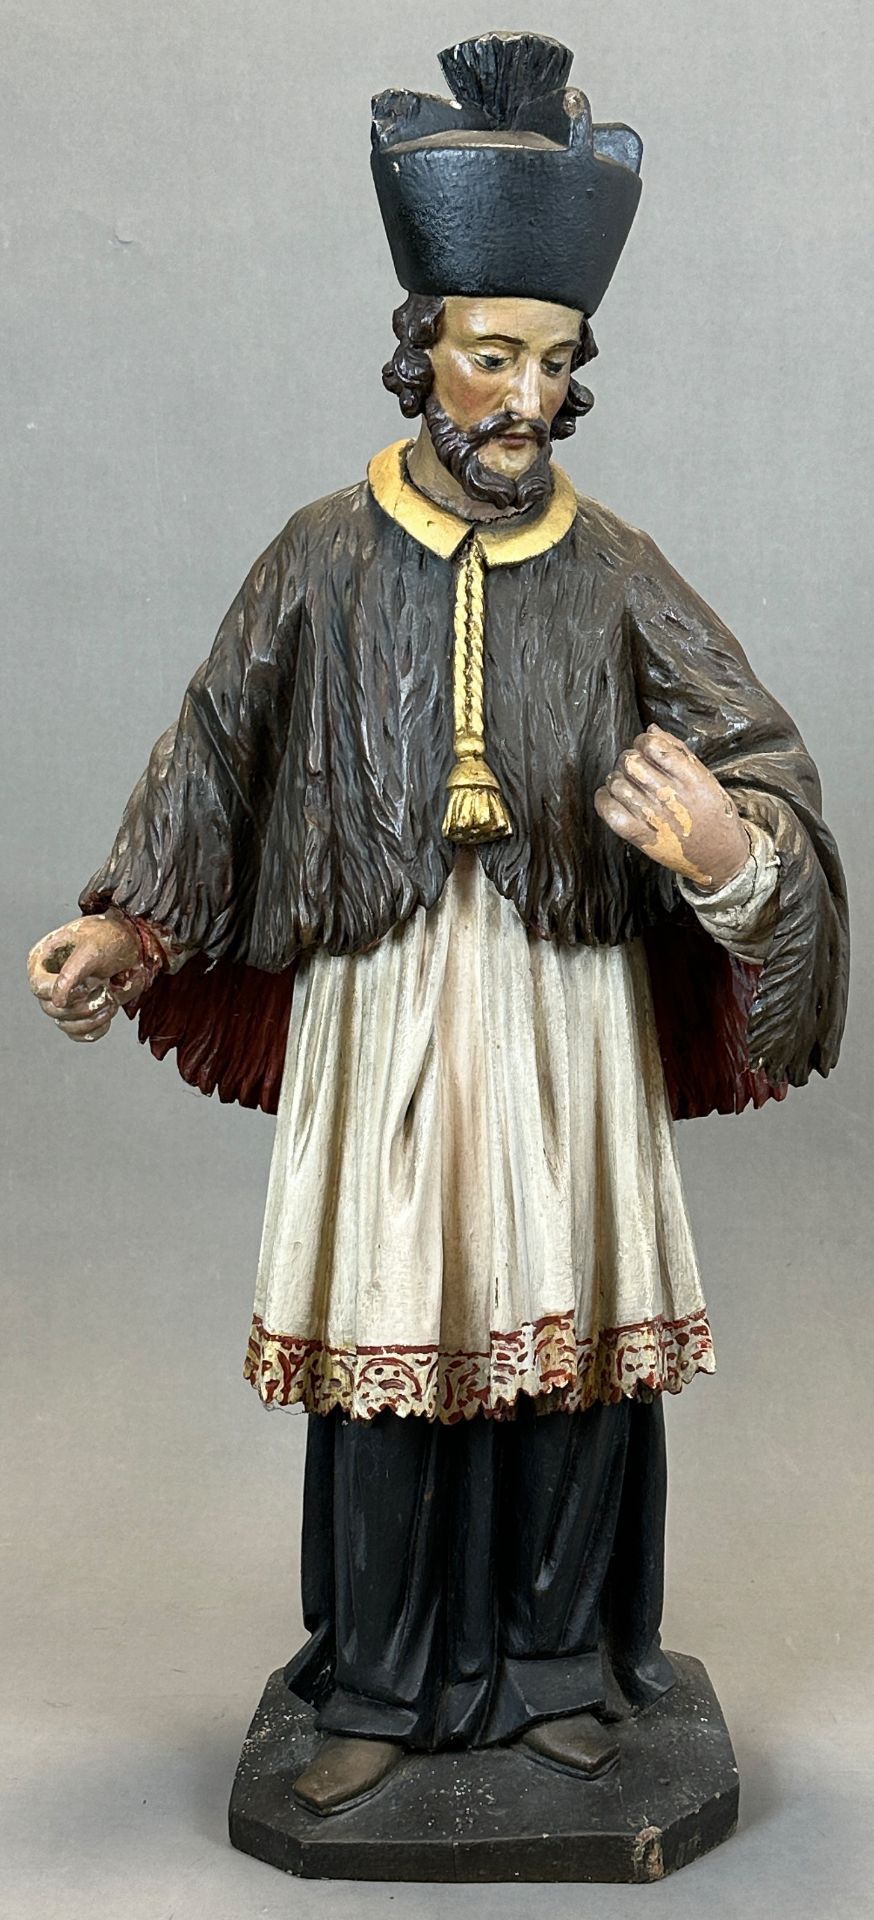 Wooden figure. Nepomuk without attributes. 19th century. Germany.